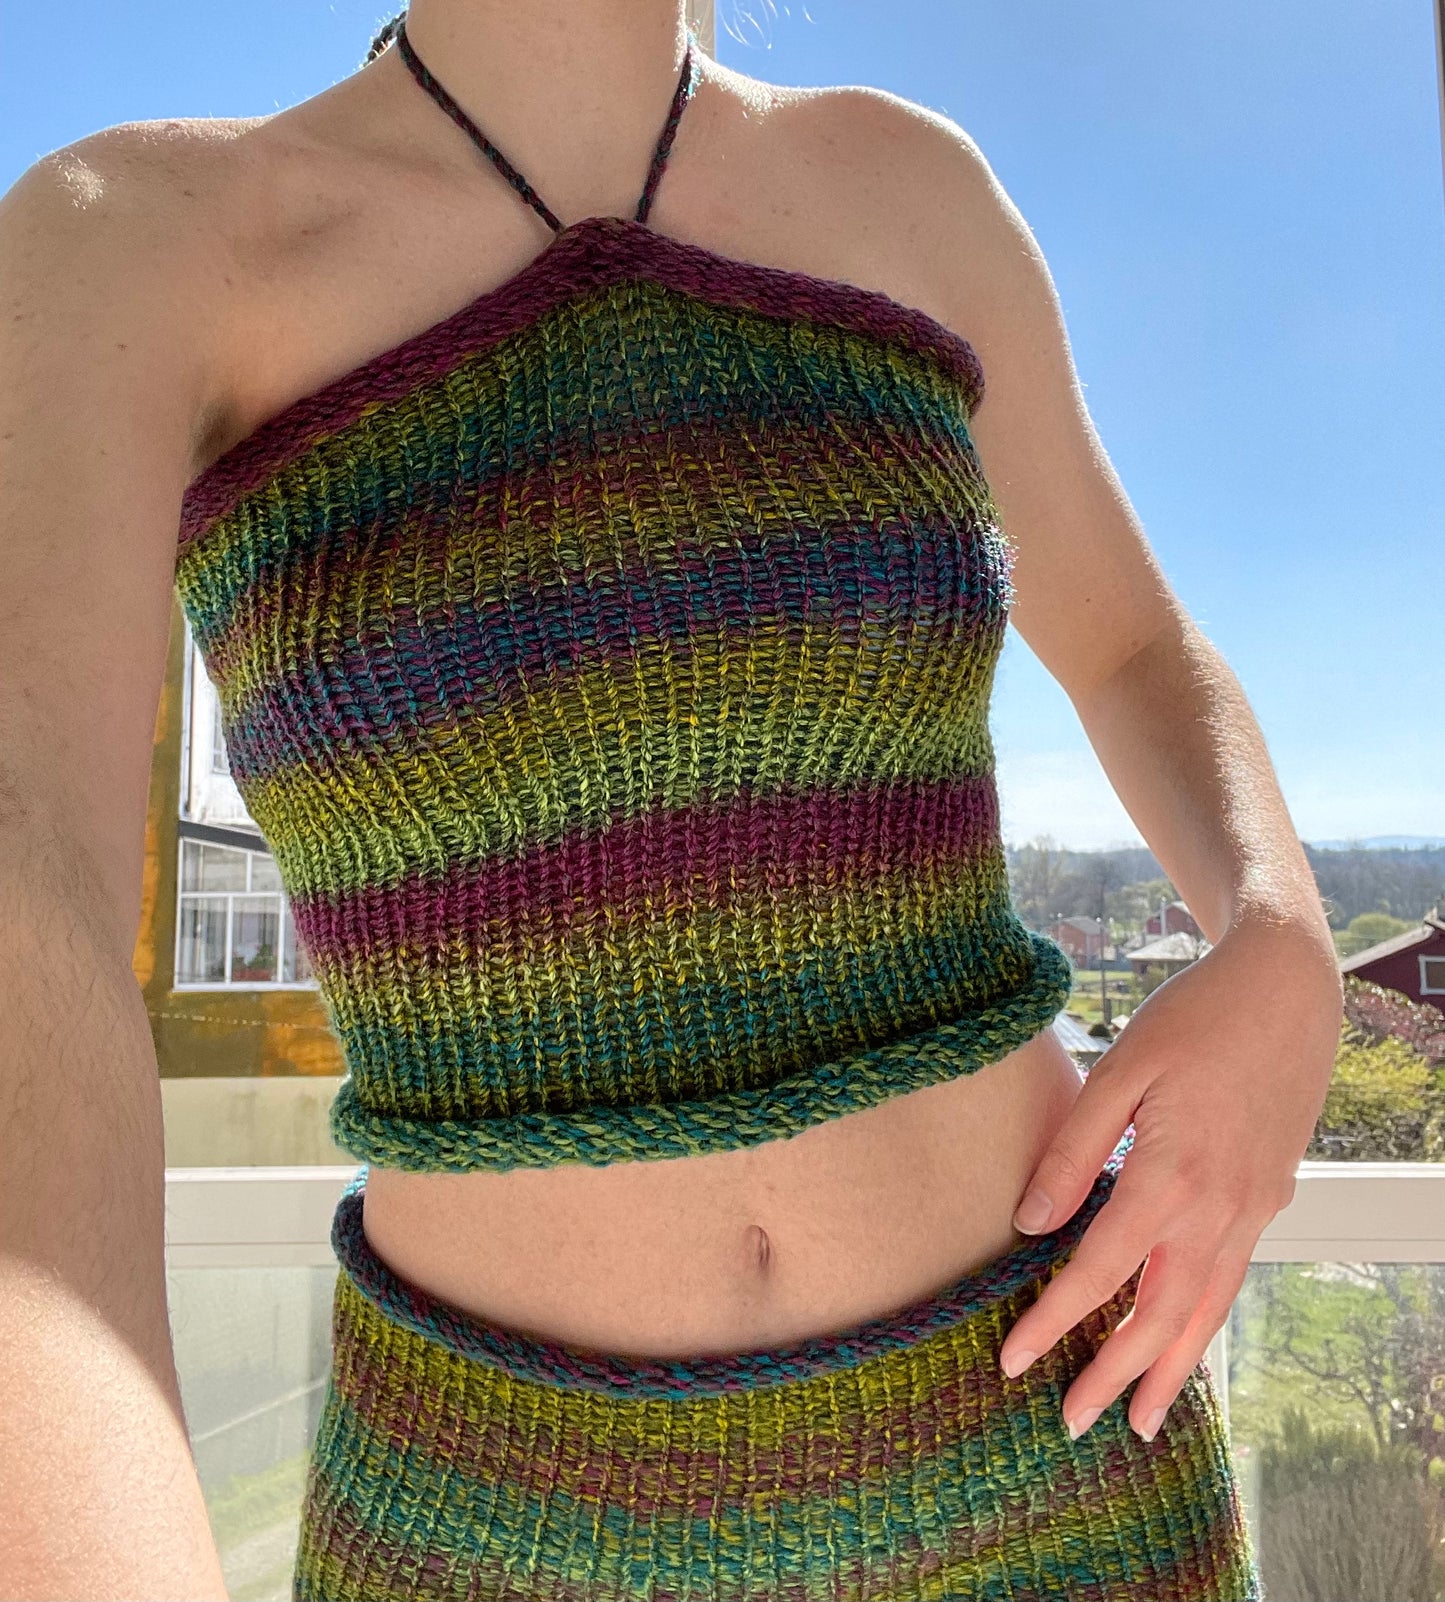 Handmade knitted halter neck top in green, purple and blue